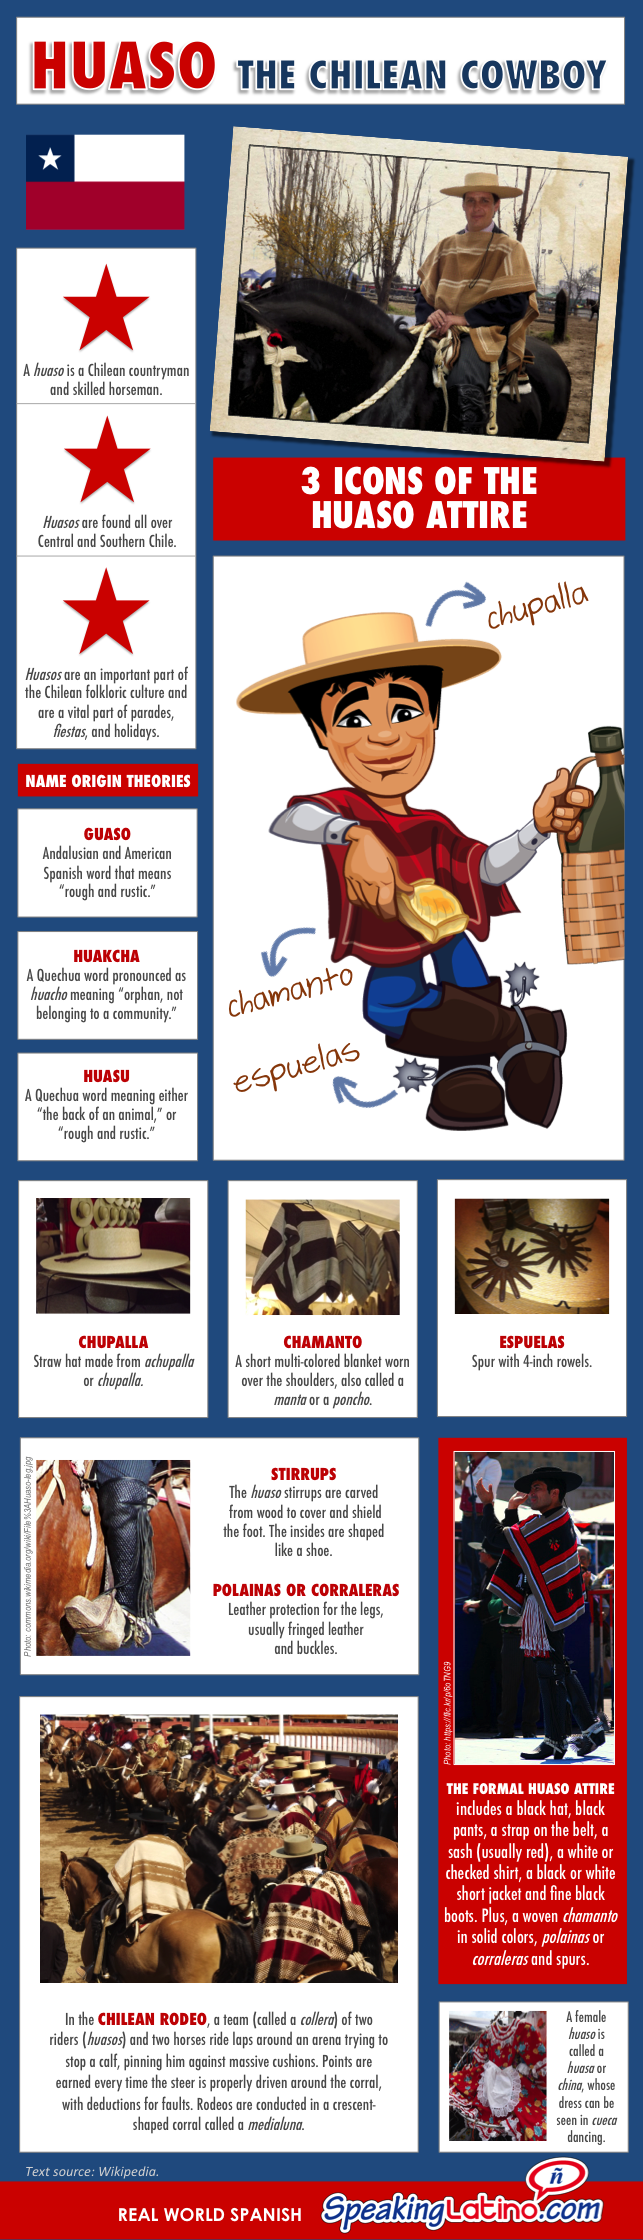 Huaso: The Chilean Cowboy Infographic